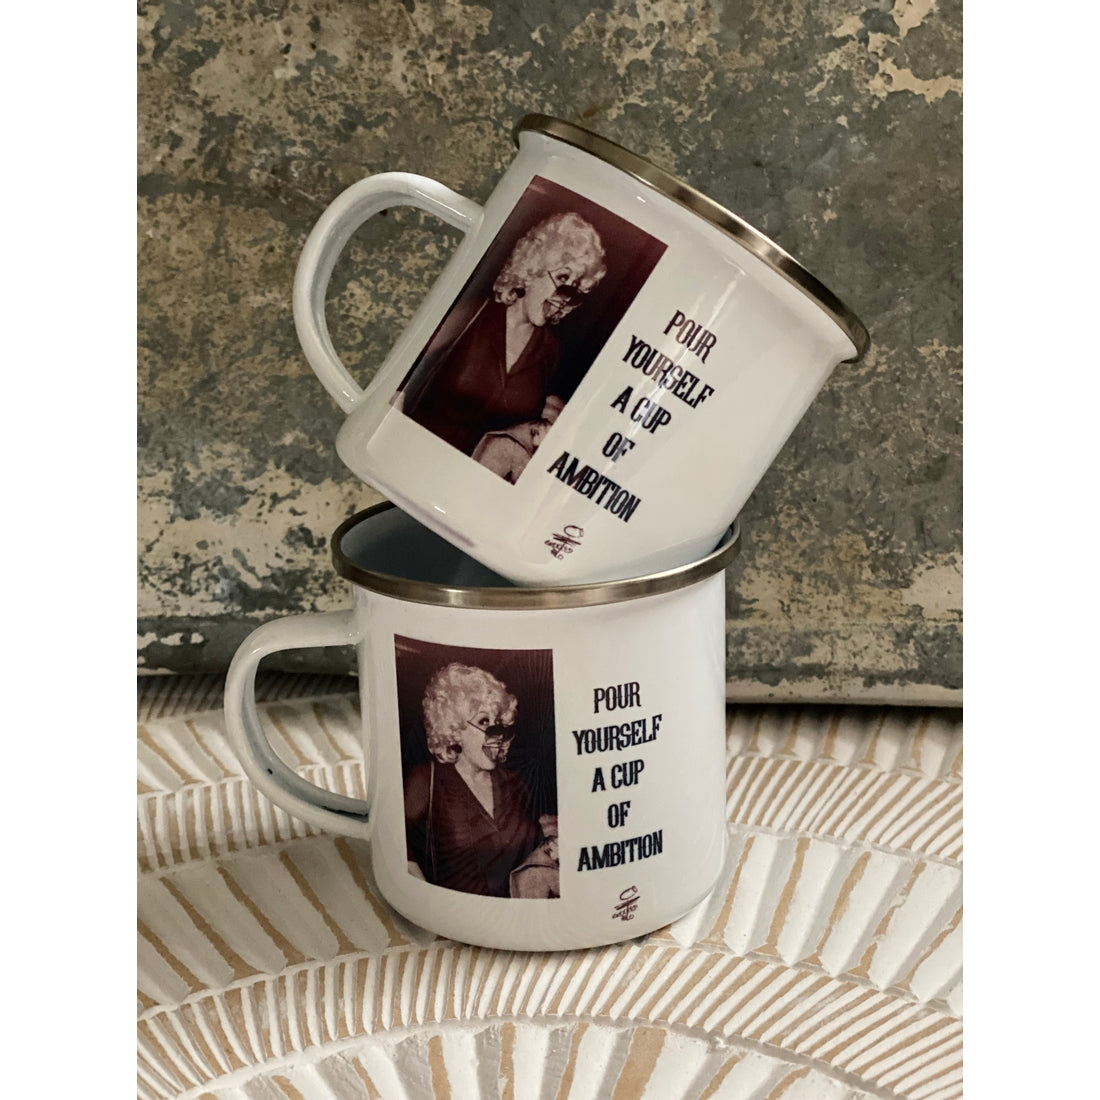 "Dolly Cup of Ambition" Metal Coffee Mug